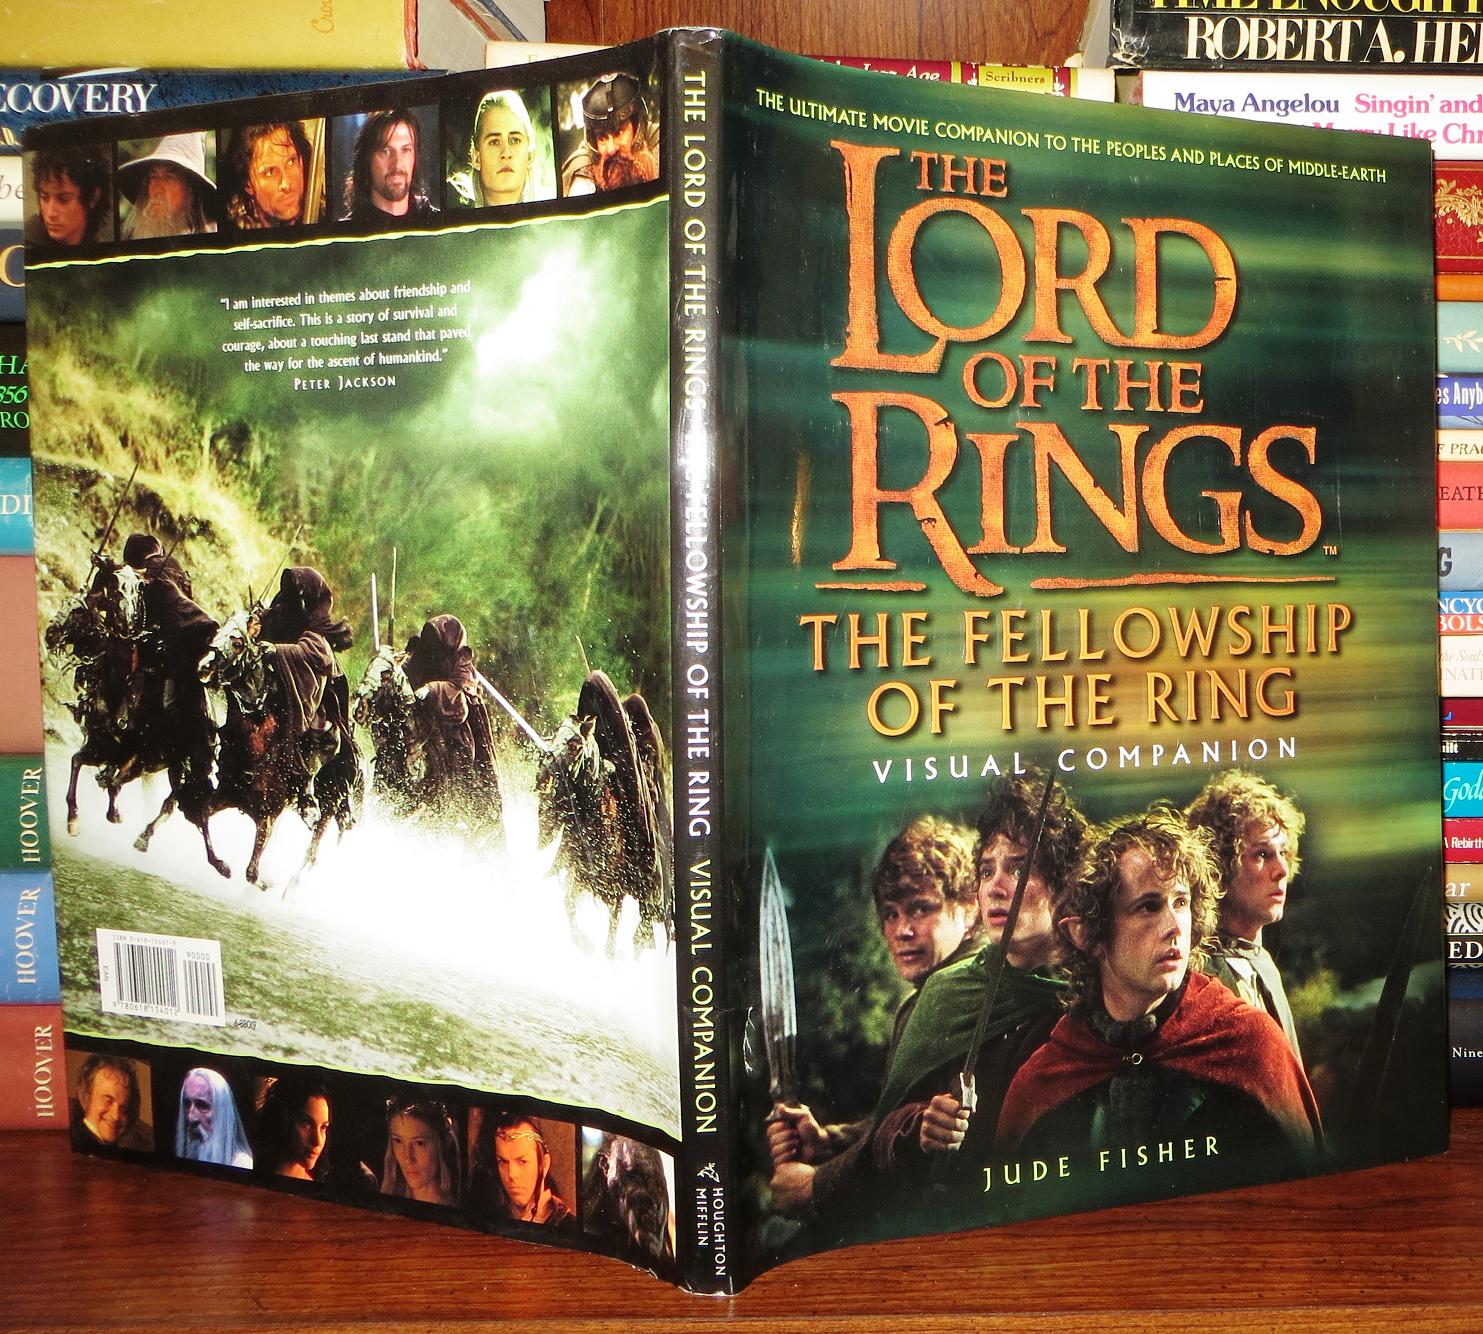 Lord of the Rings: The Fellowship of the Ring Study Guide on CDROM